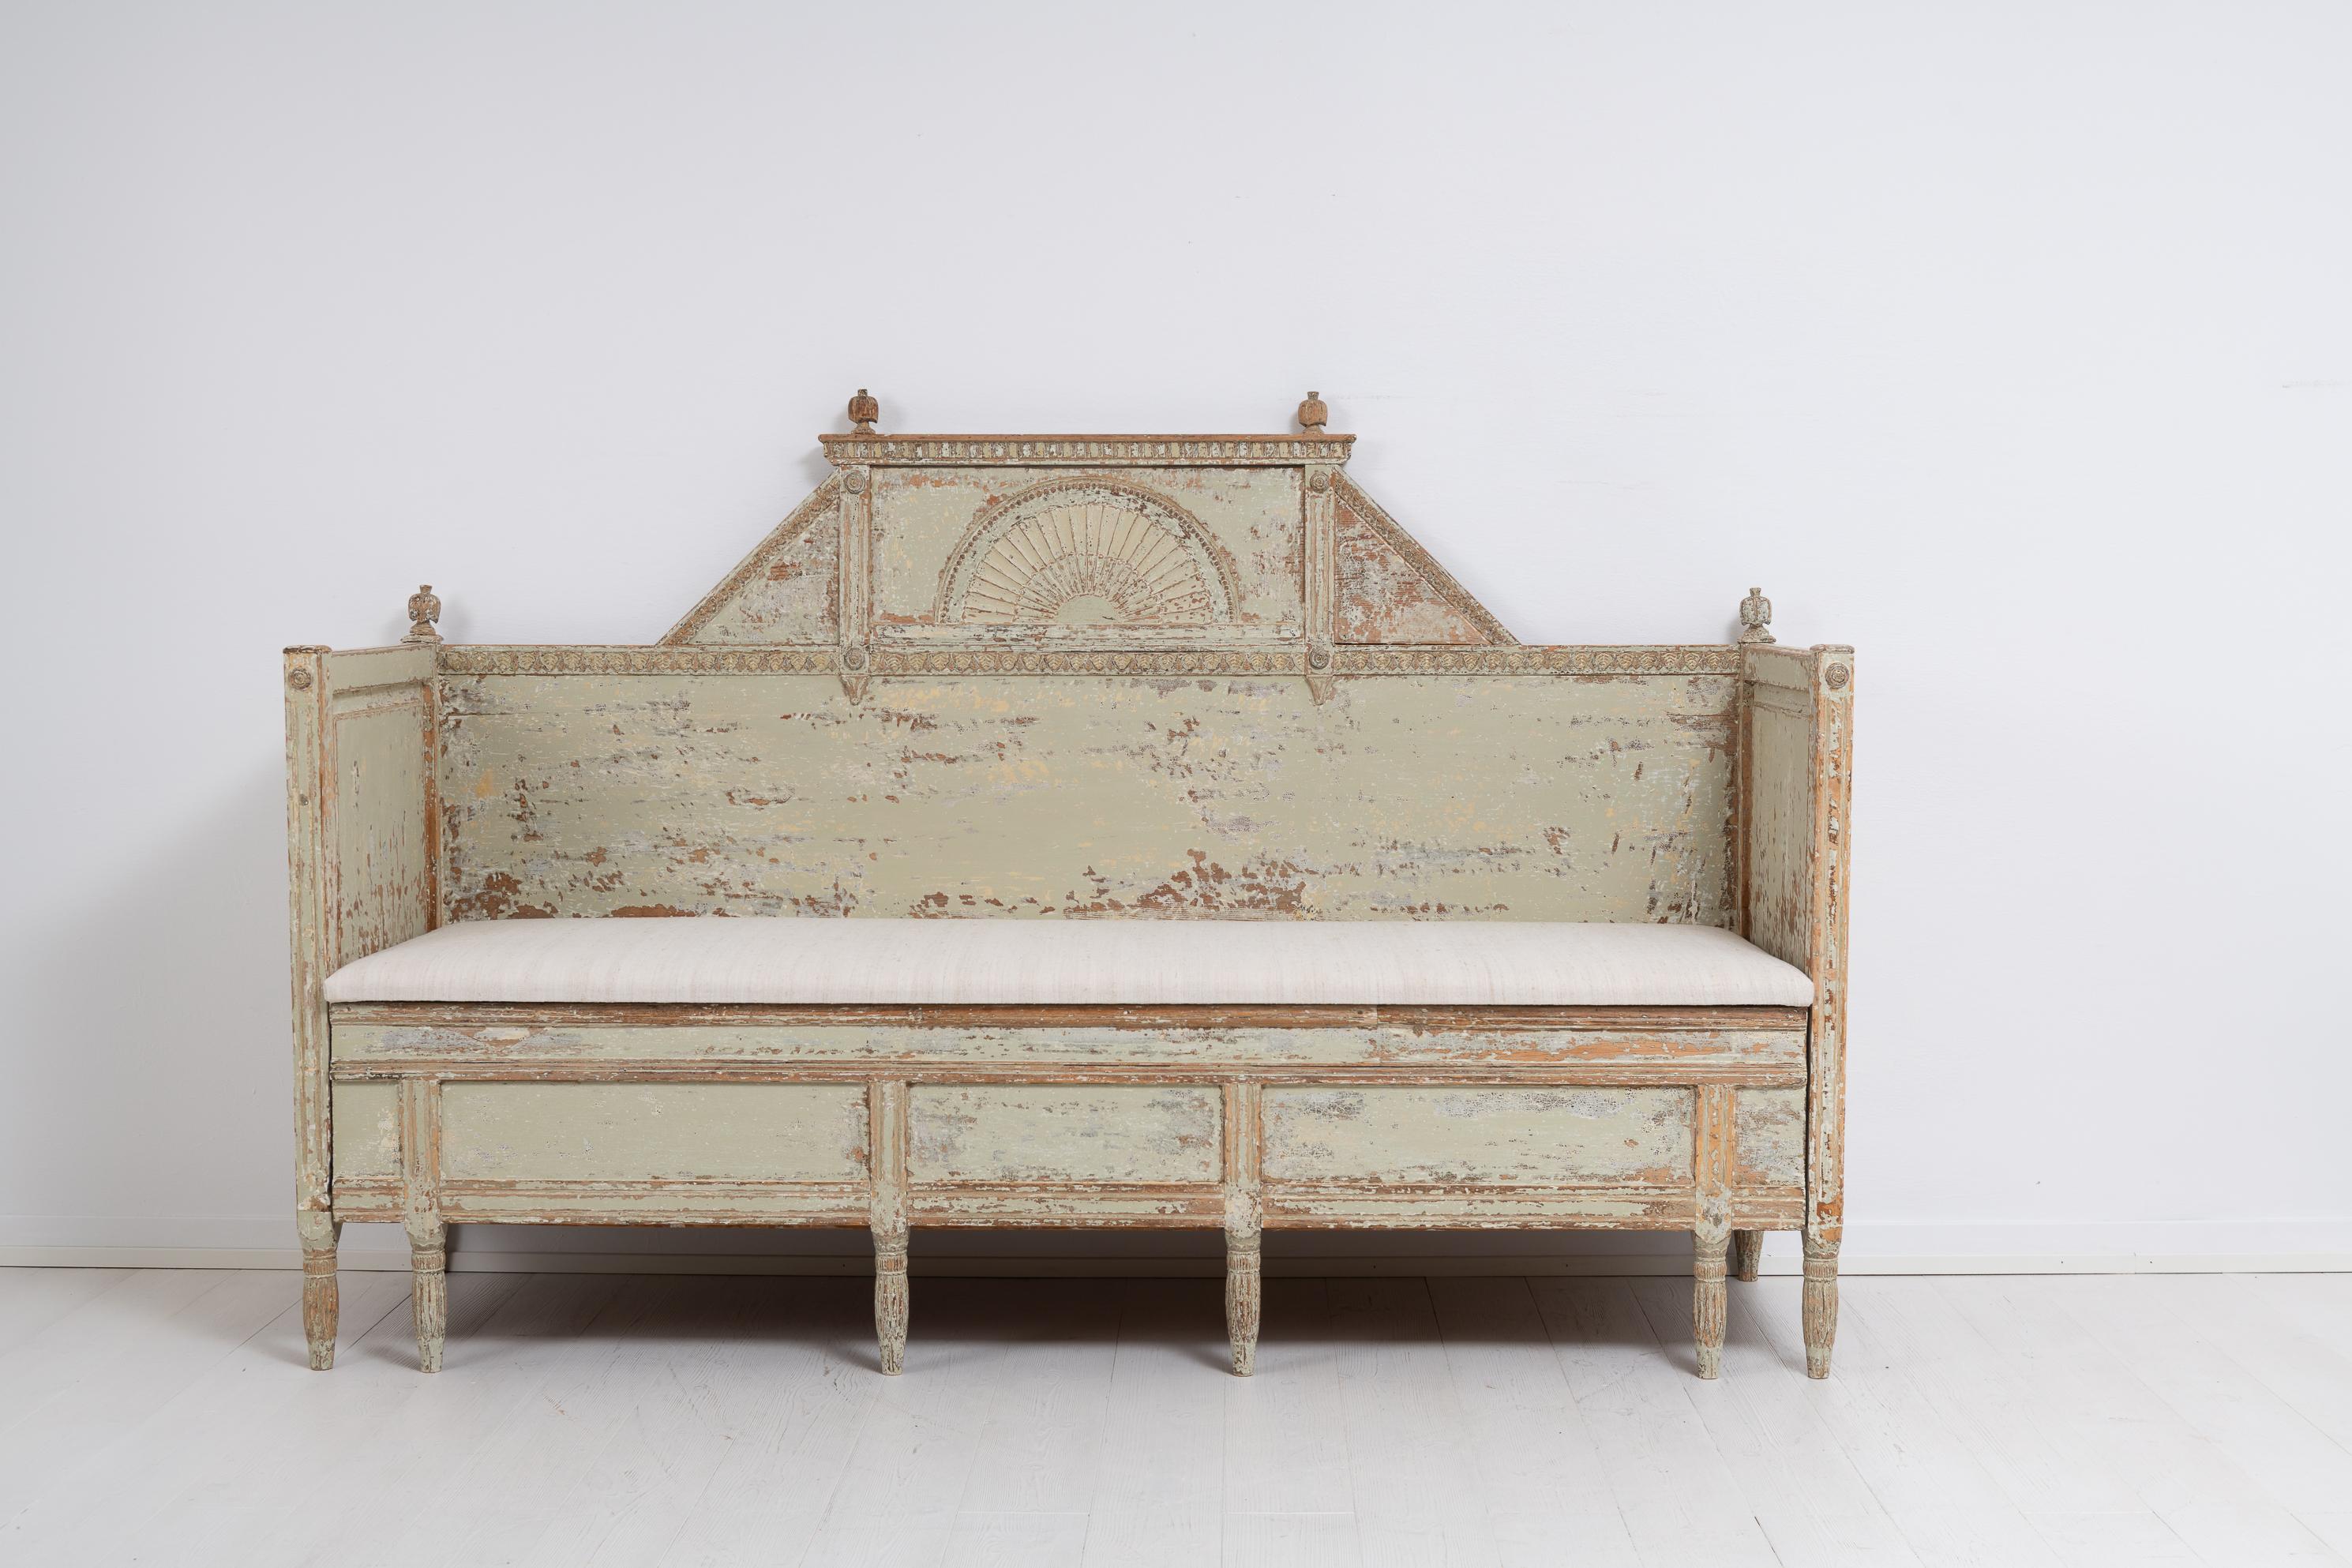 Gustavian sofa from Northern Sweden and a classic example of antique Swedish country house furnitures. The sofa is pine and dry scraped to the original first layer of paint. The hand-made decor on both the front, backrest and armrests is very